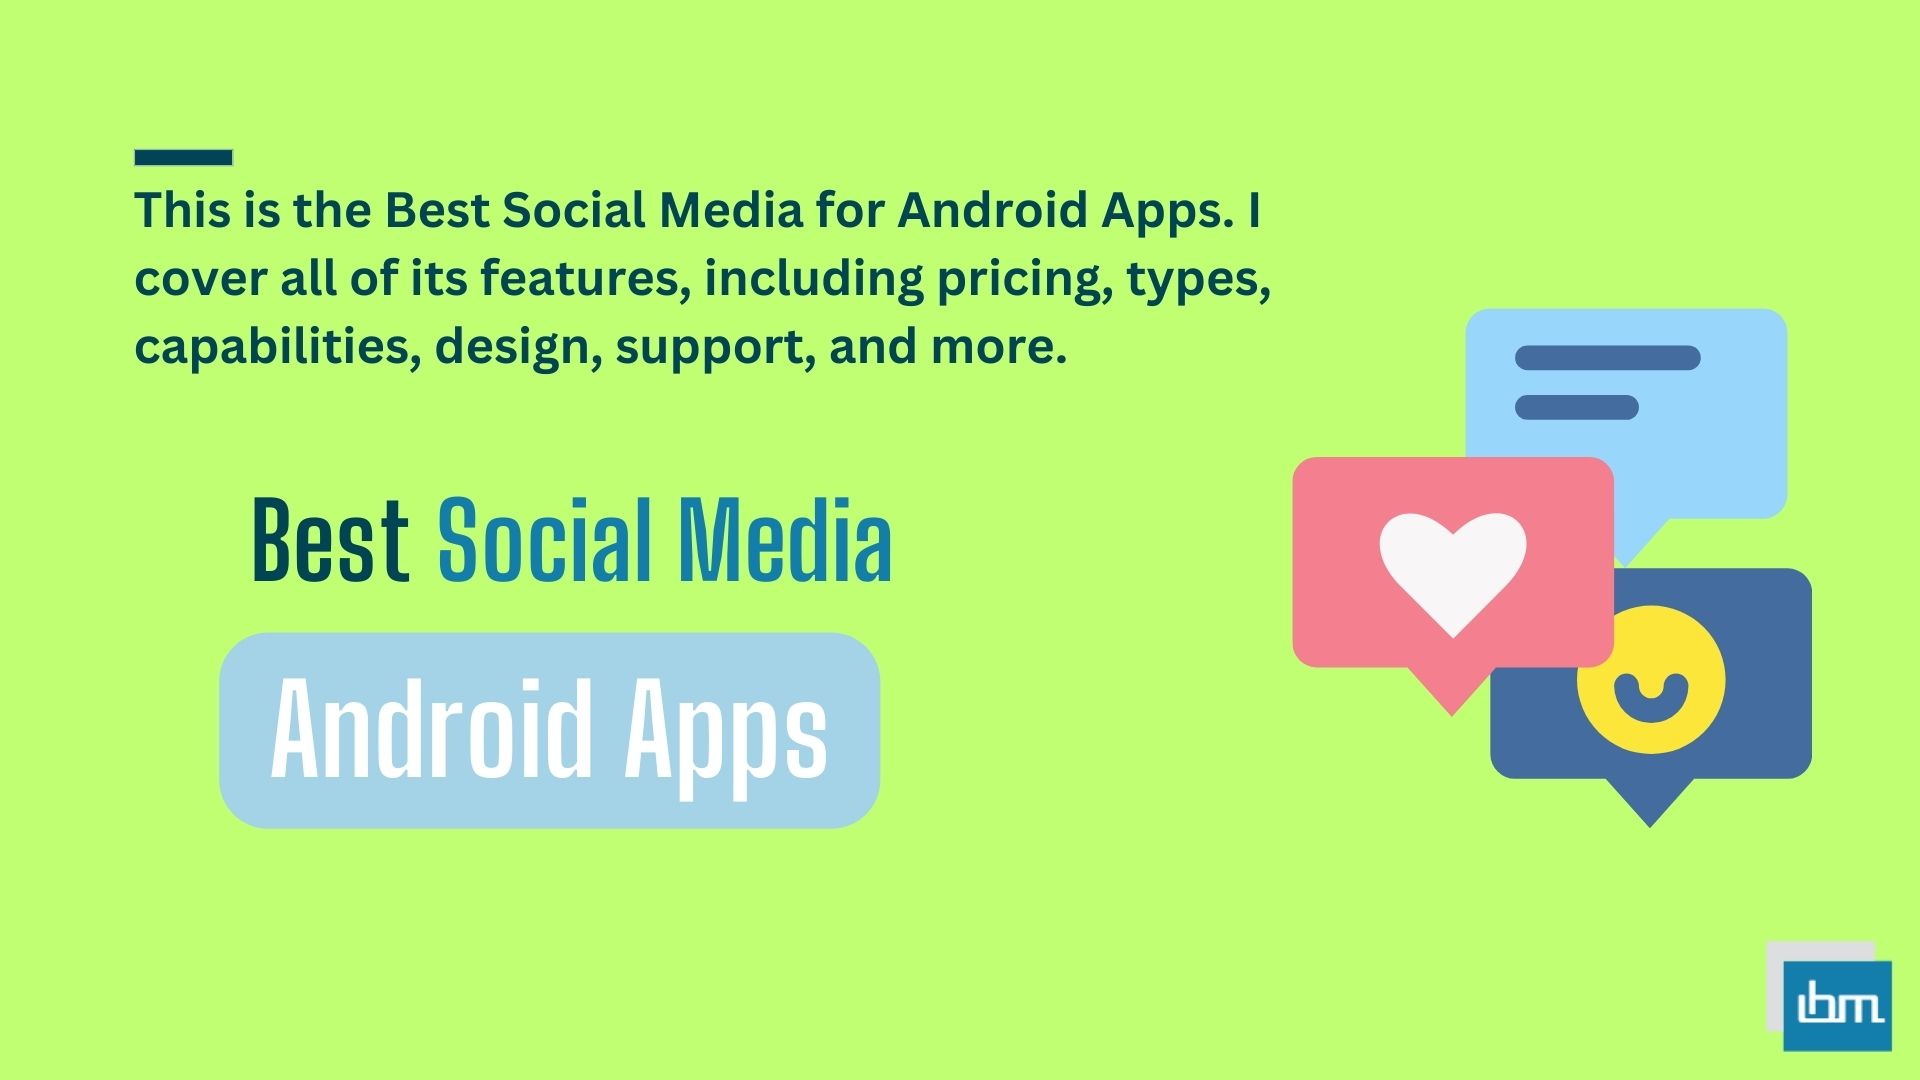 Best Social Media for Android Apps